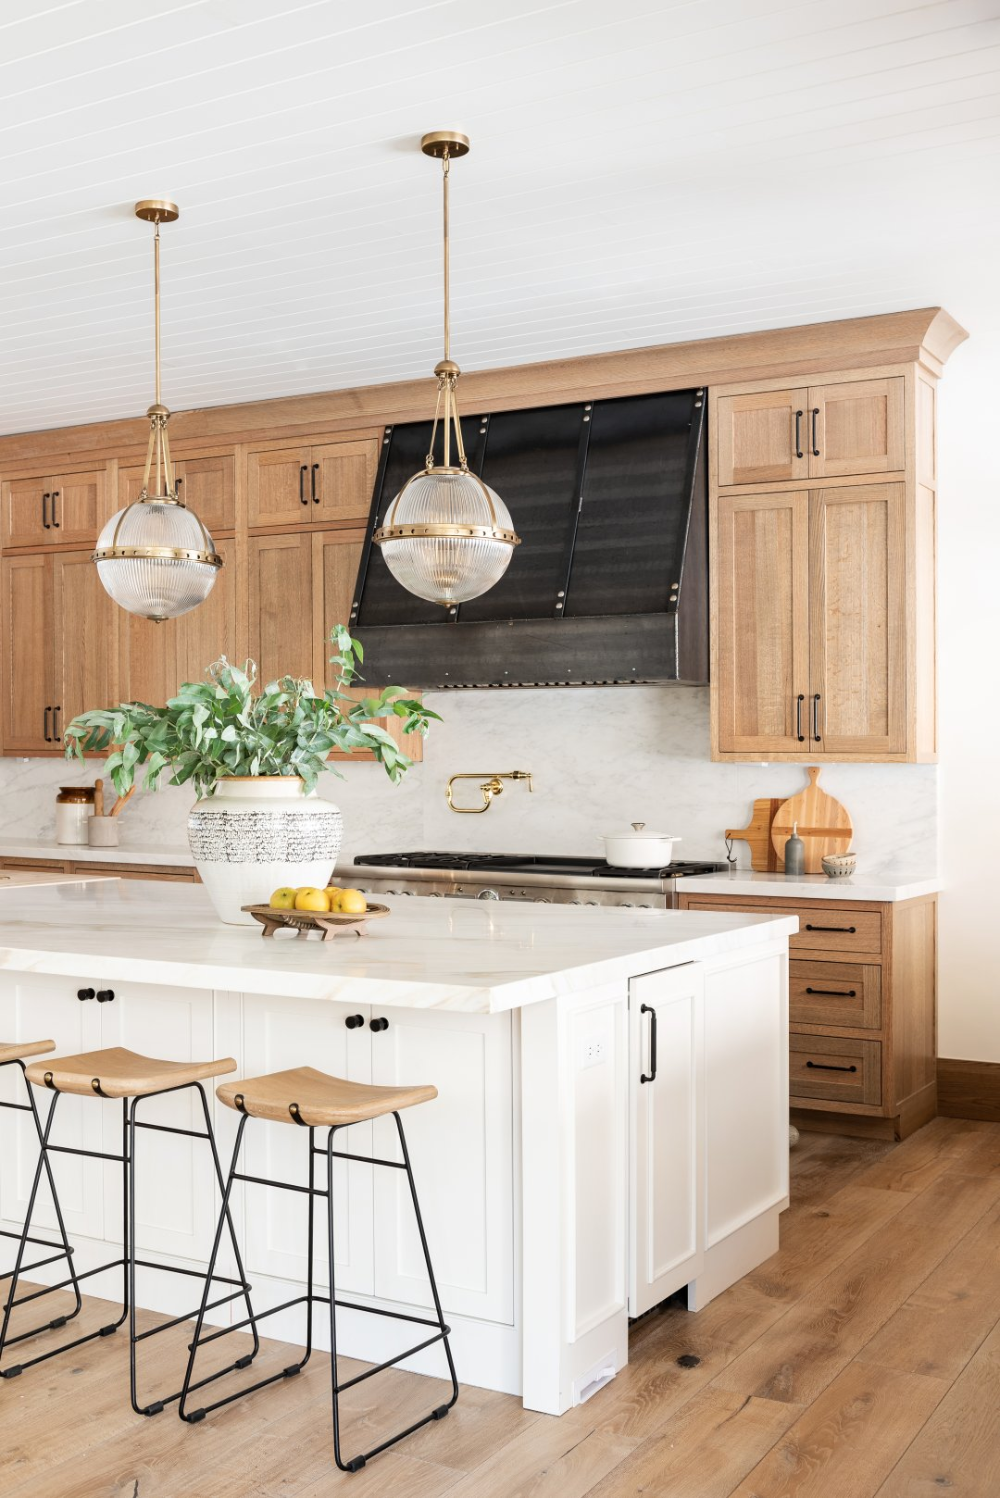 Why should i use solid wood kitchen
cabinets?